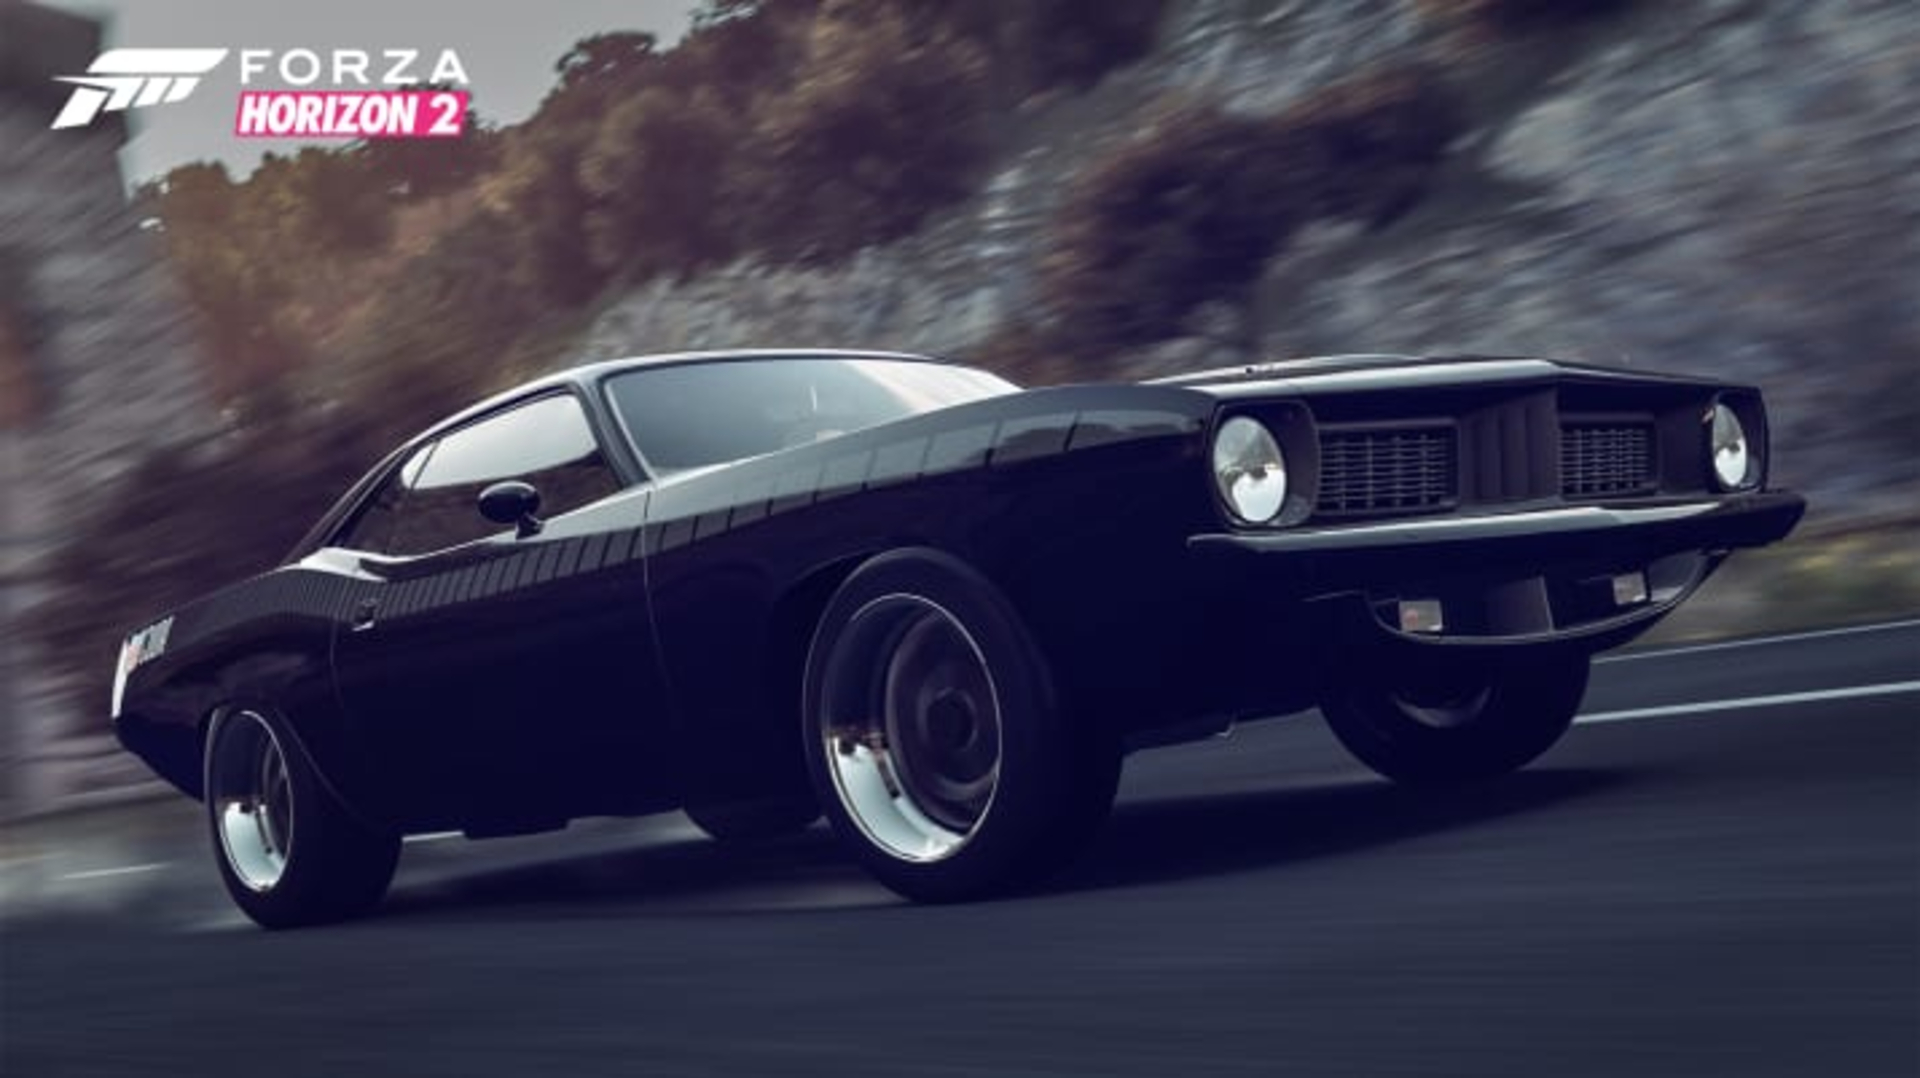 Forza Horizon 2 Presents Fast and Furious 1970 Plymouth Cuda AAR